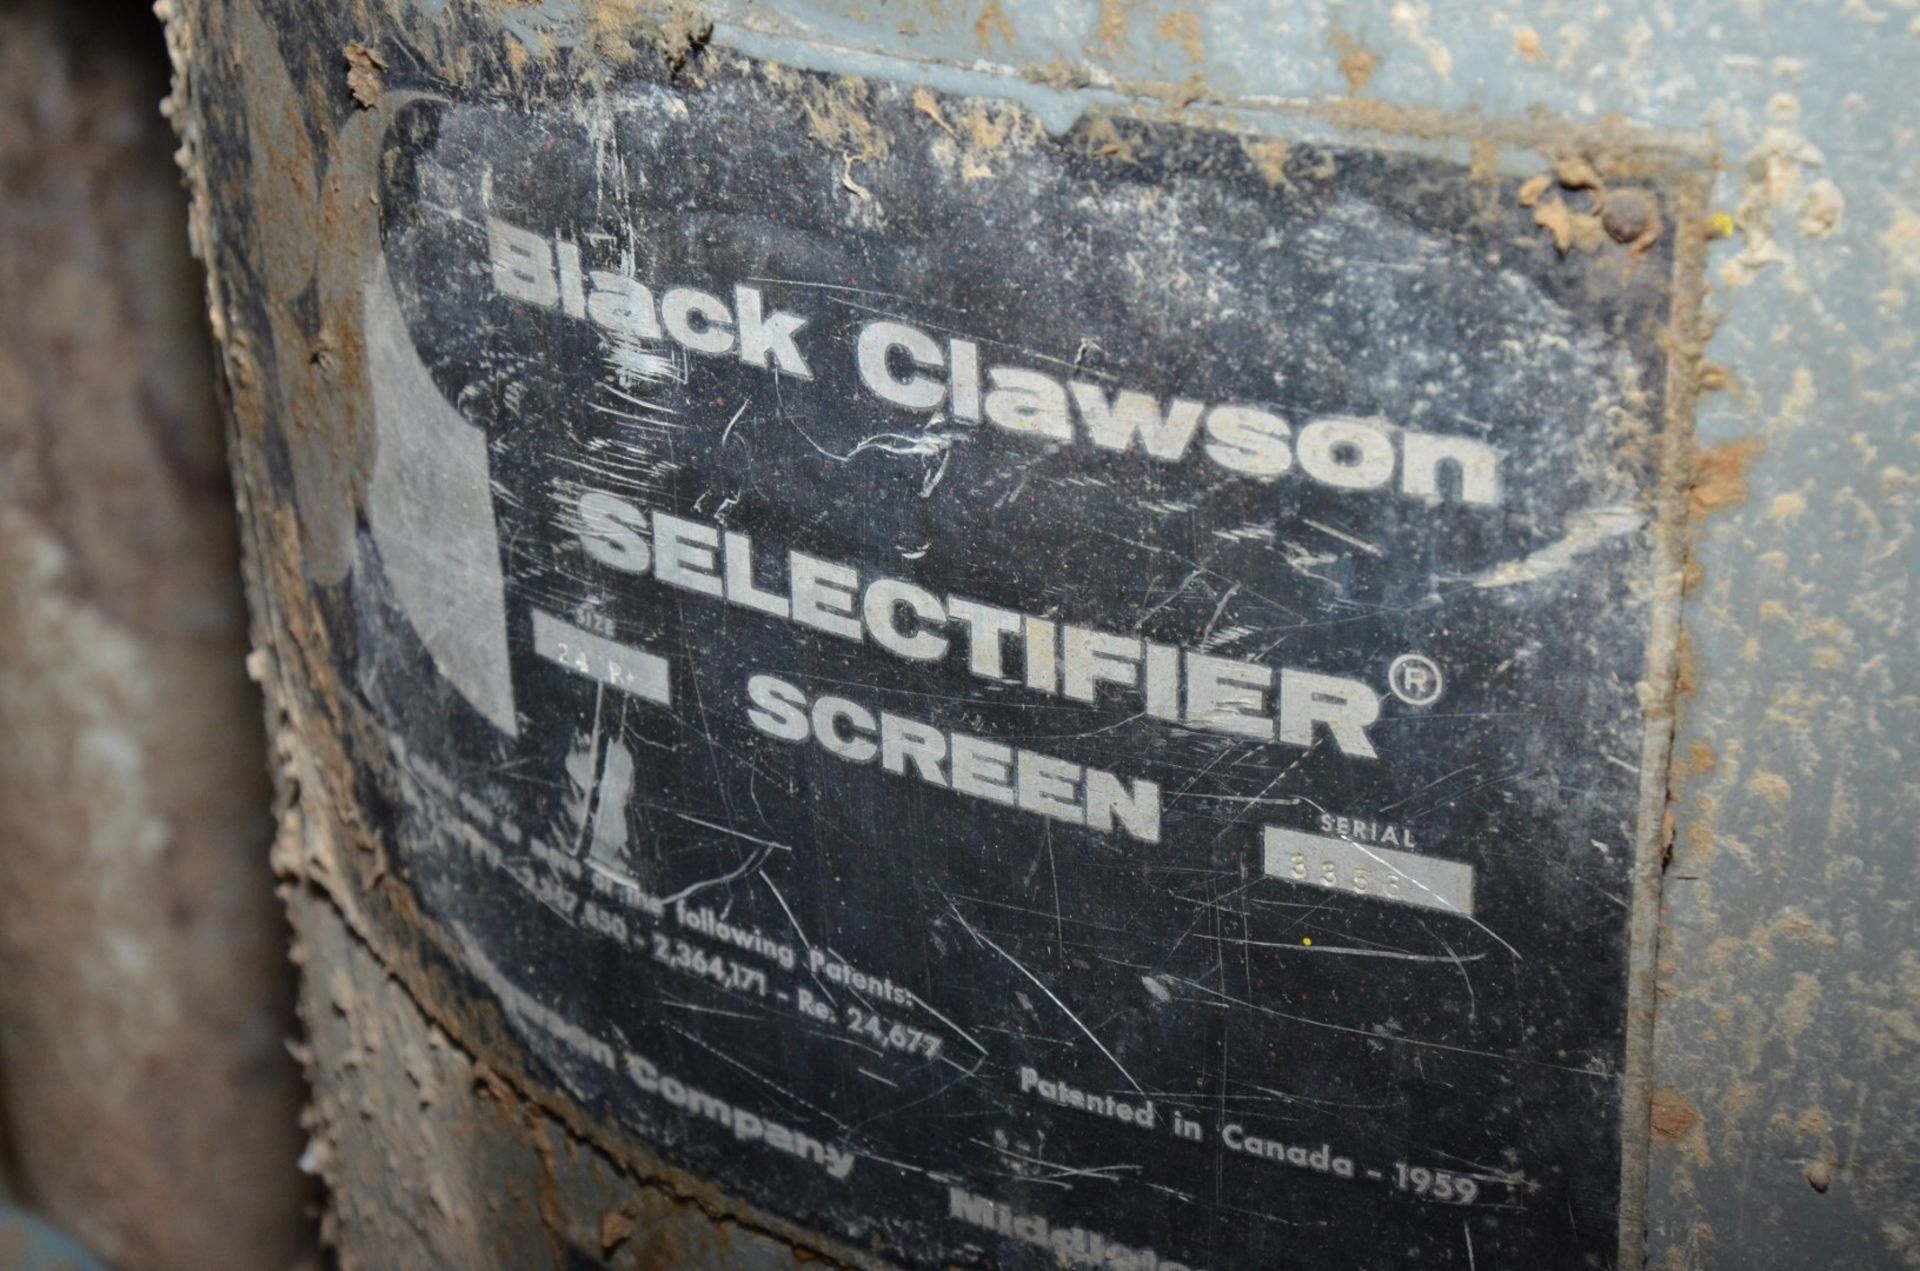 BLACK CLAWSON SELECTIFIER MODEL 24P STAINLESS STEEL SCREEN WITH APPROX. 24" DIA BASKET, STEEL - Image 5 of 7